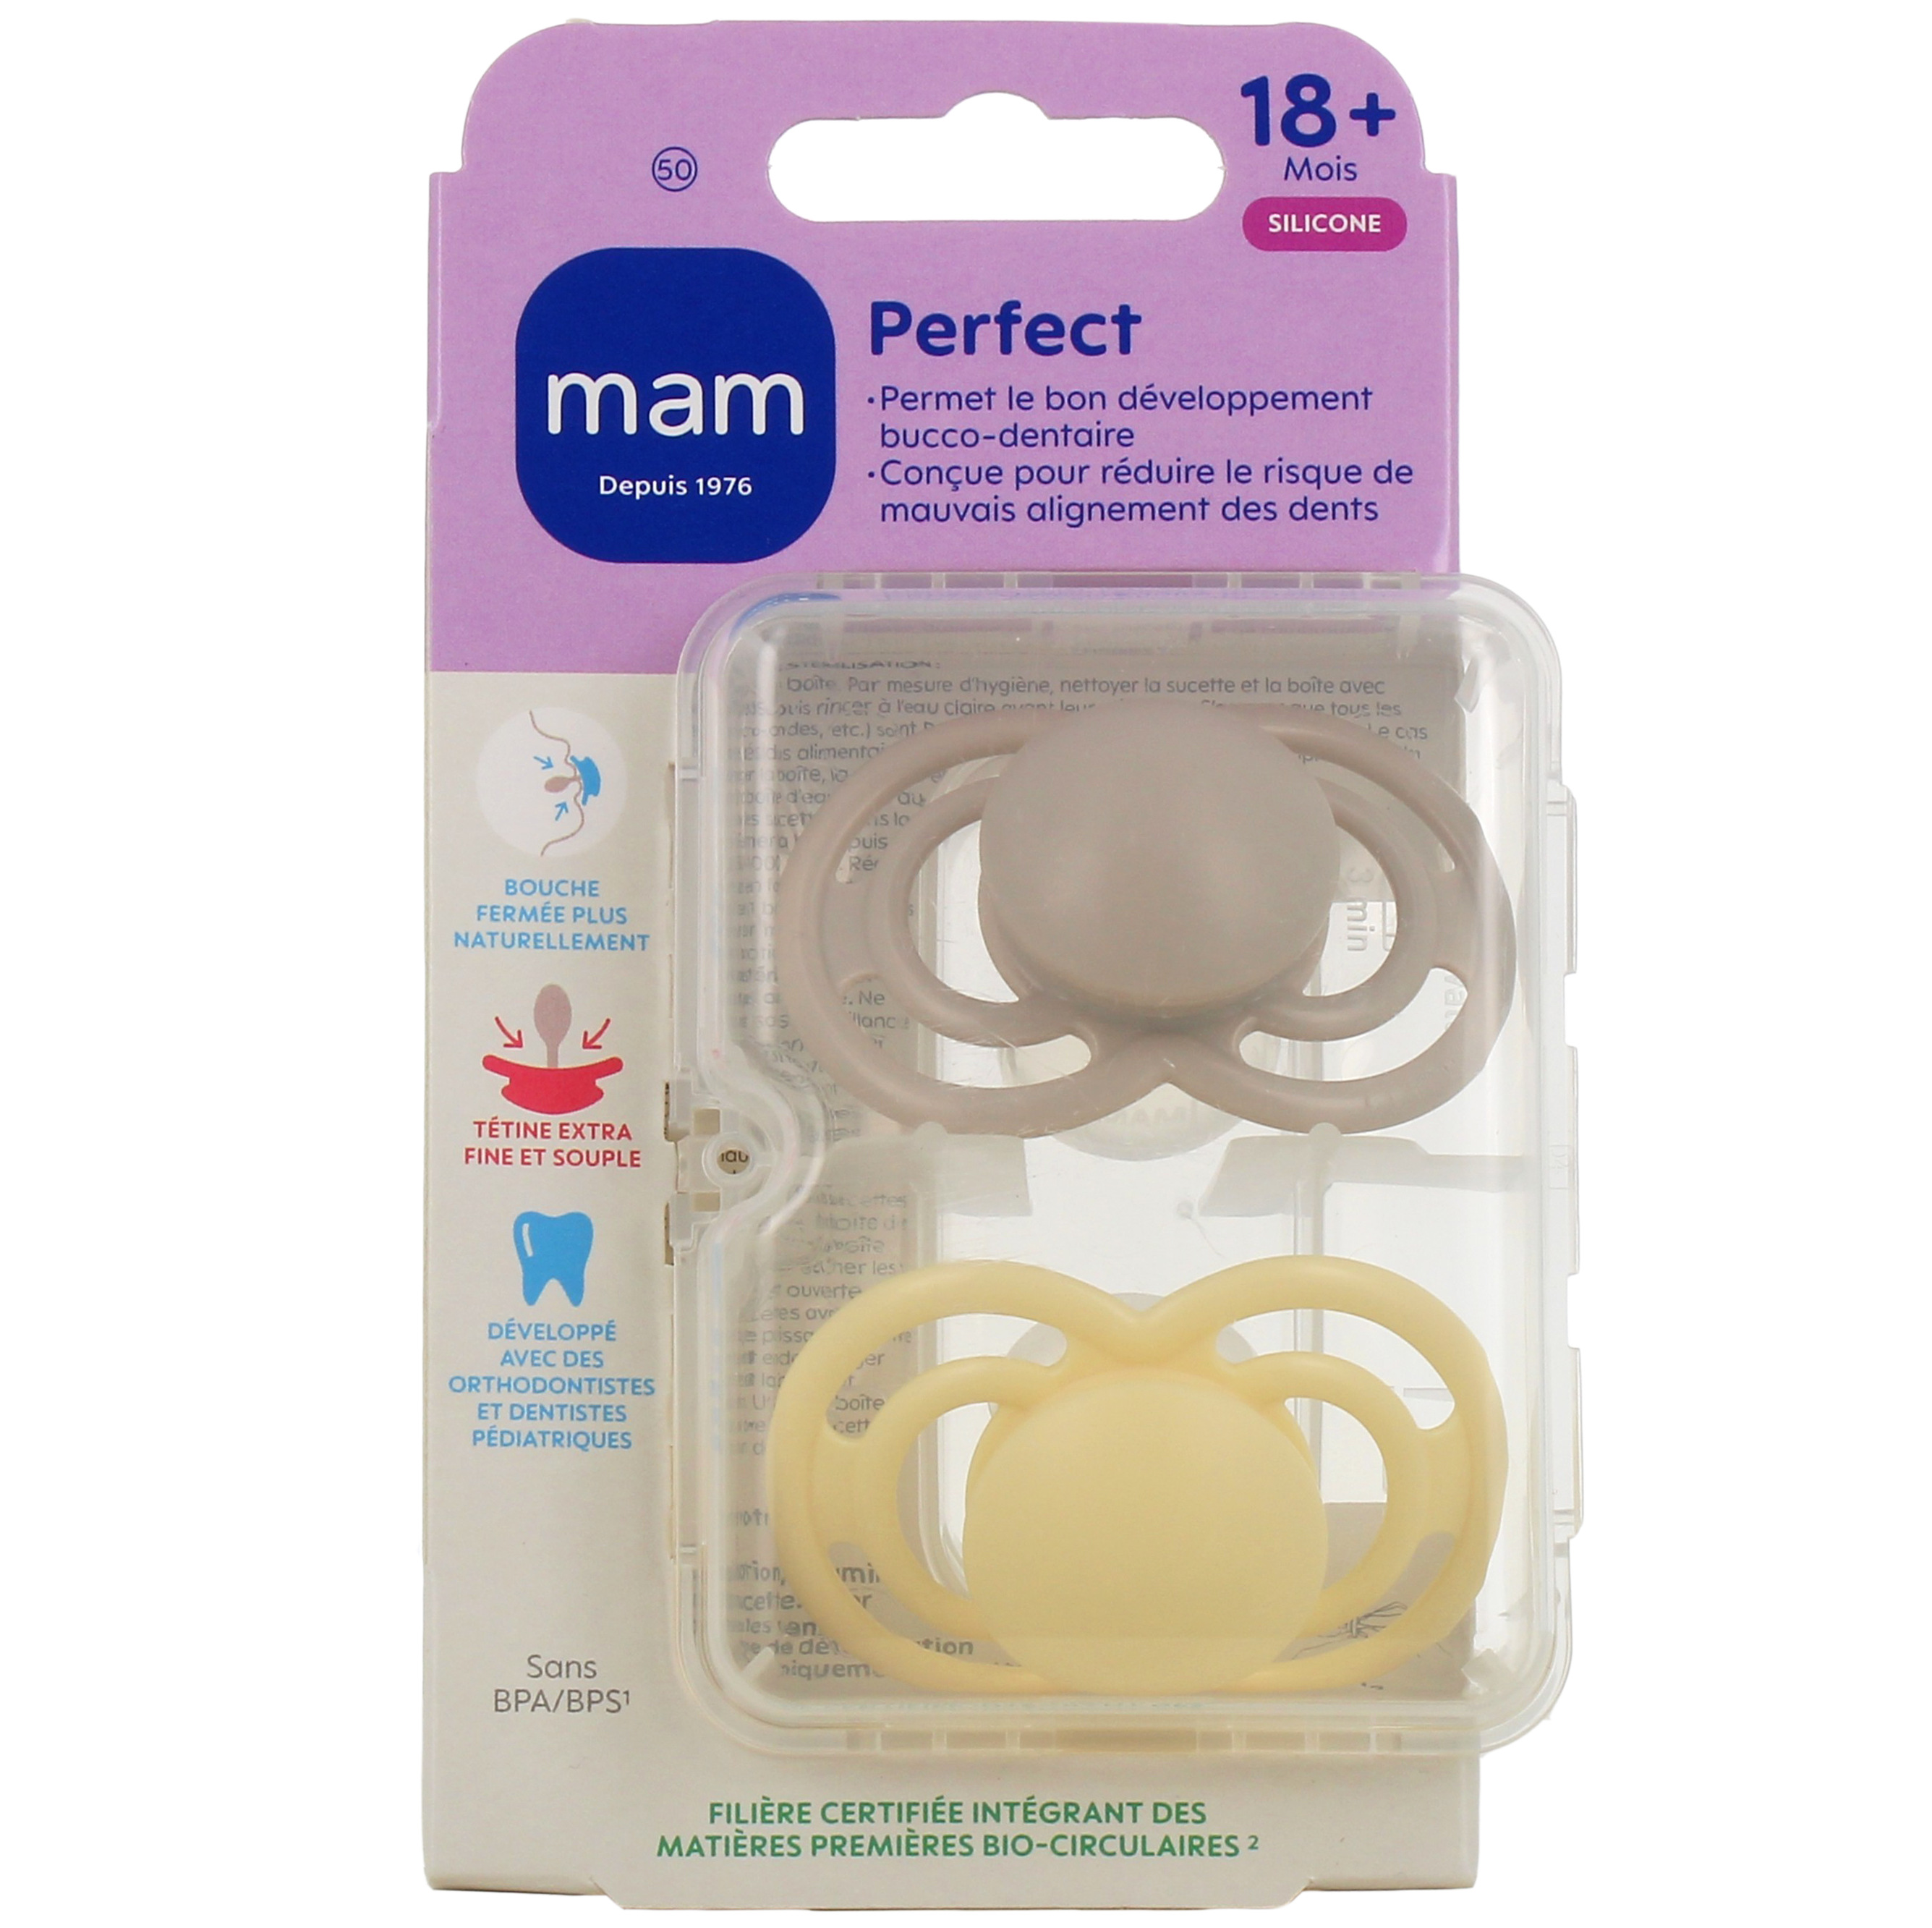 Sucettes - Perfect - +18 Mois - MAM - n°50 - Mam